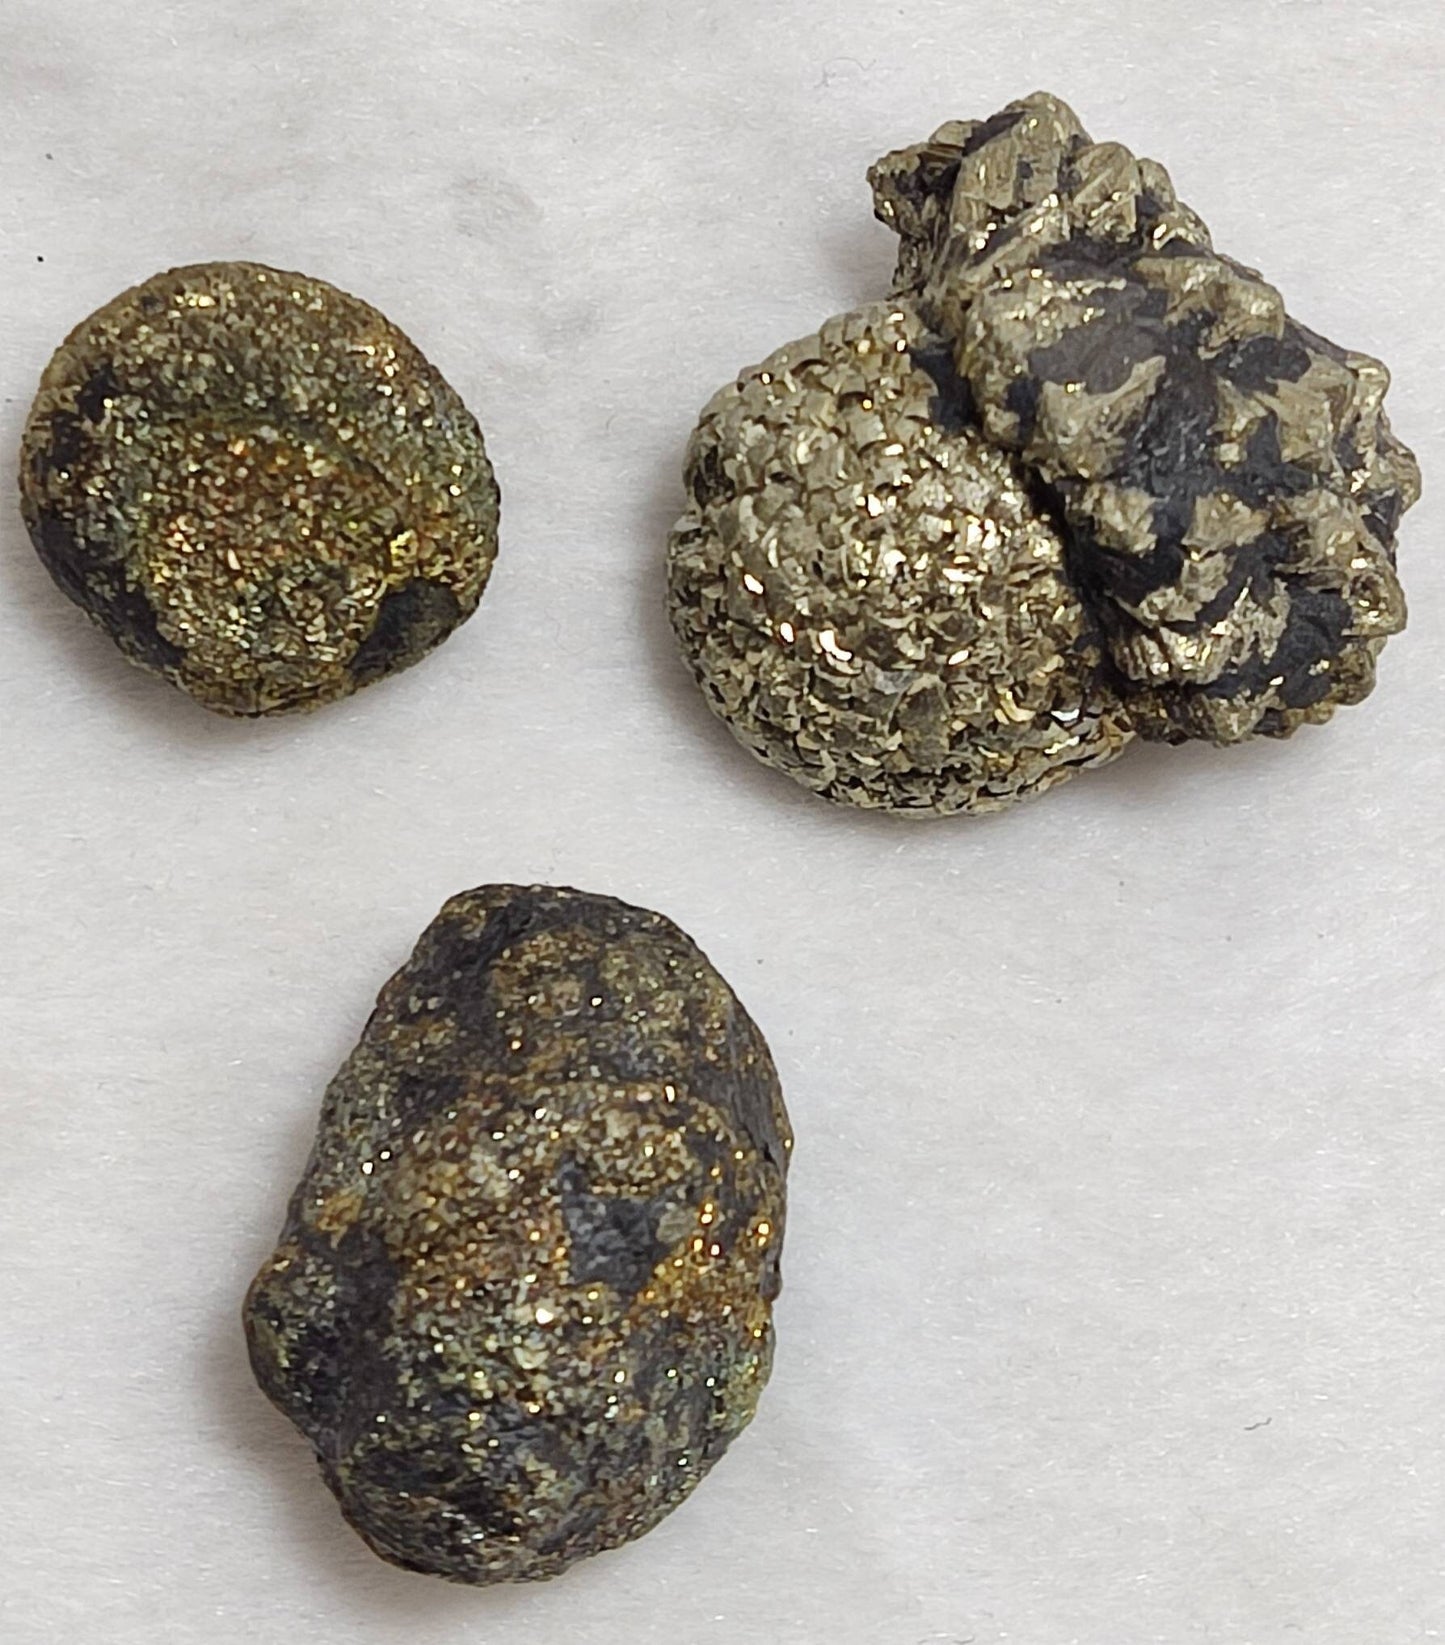 An amazing lot of pyrite/marcasite specimen 3 pieces collective weight 79 grams